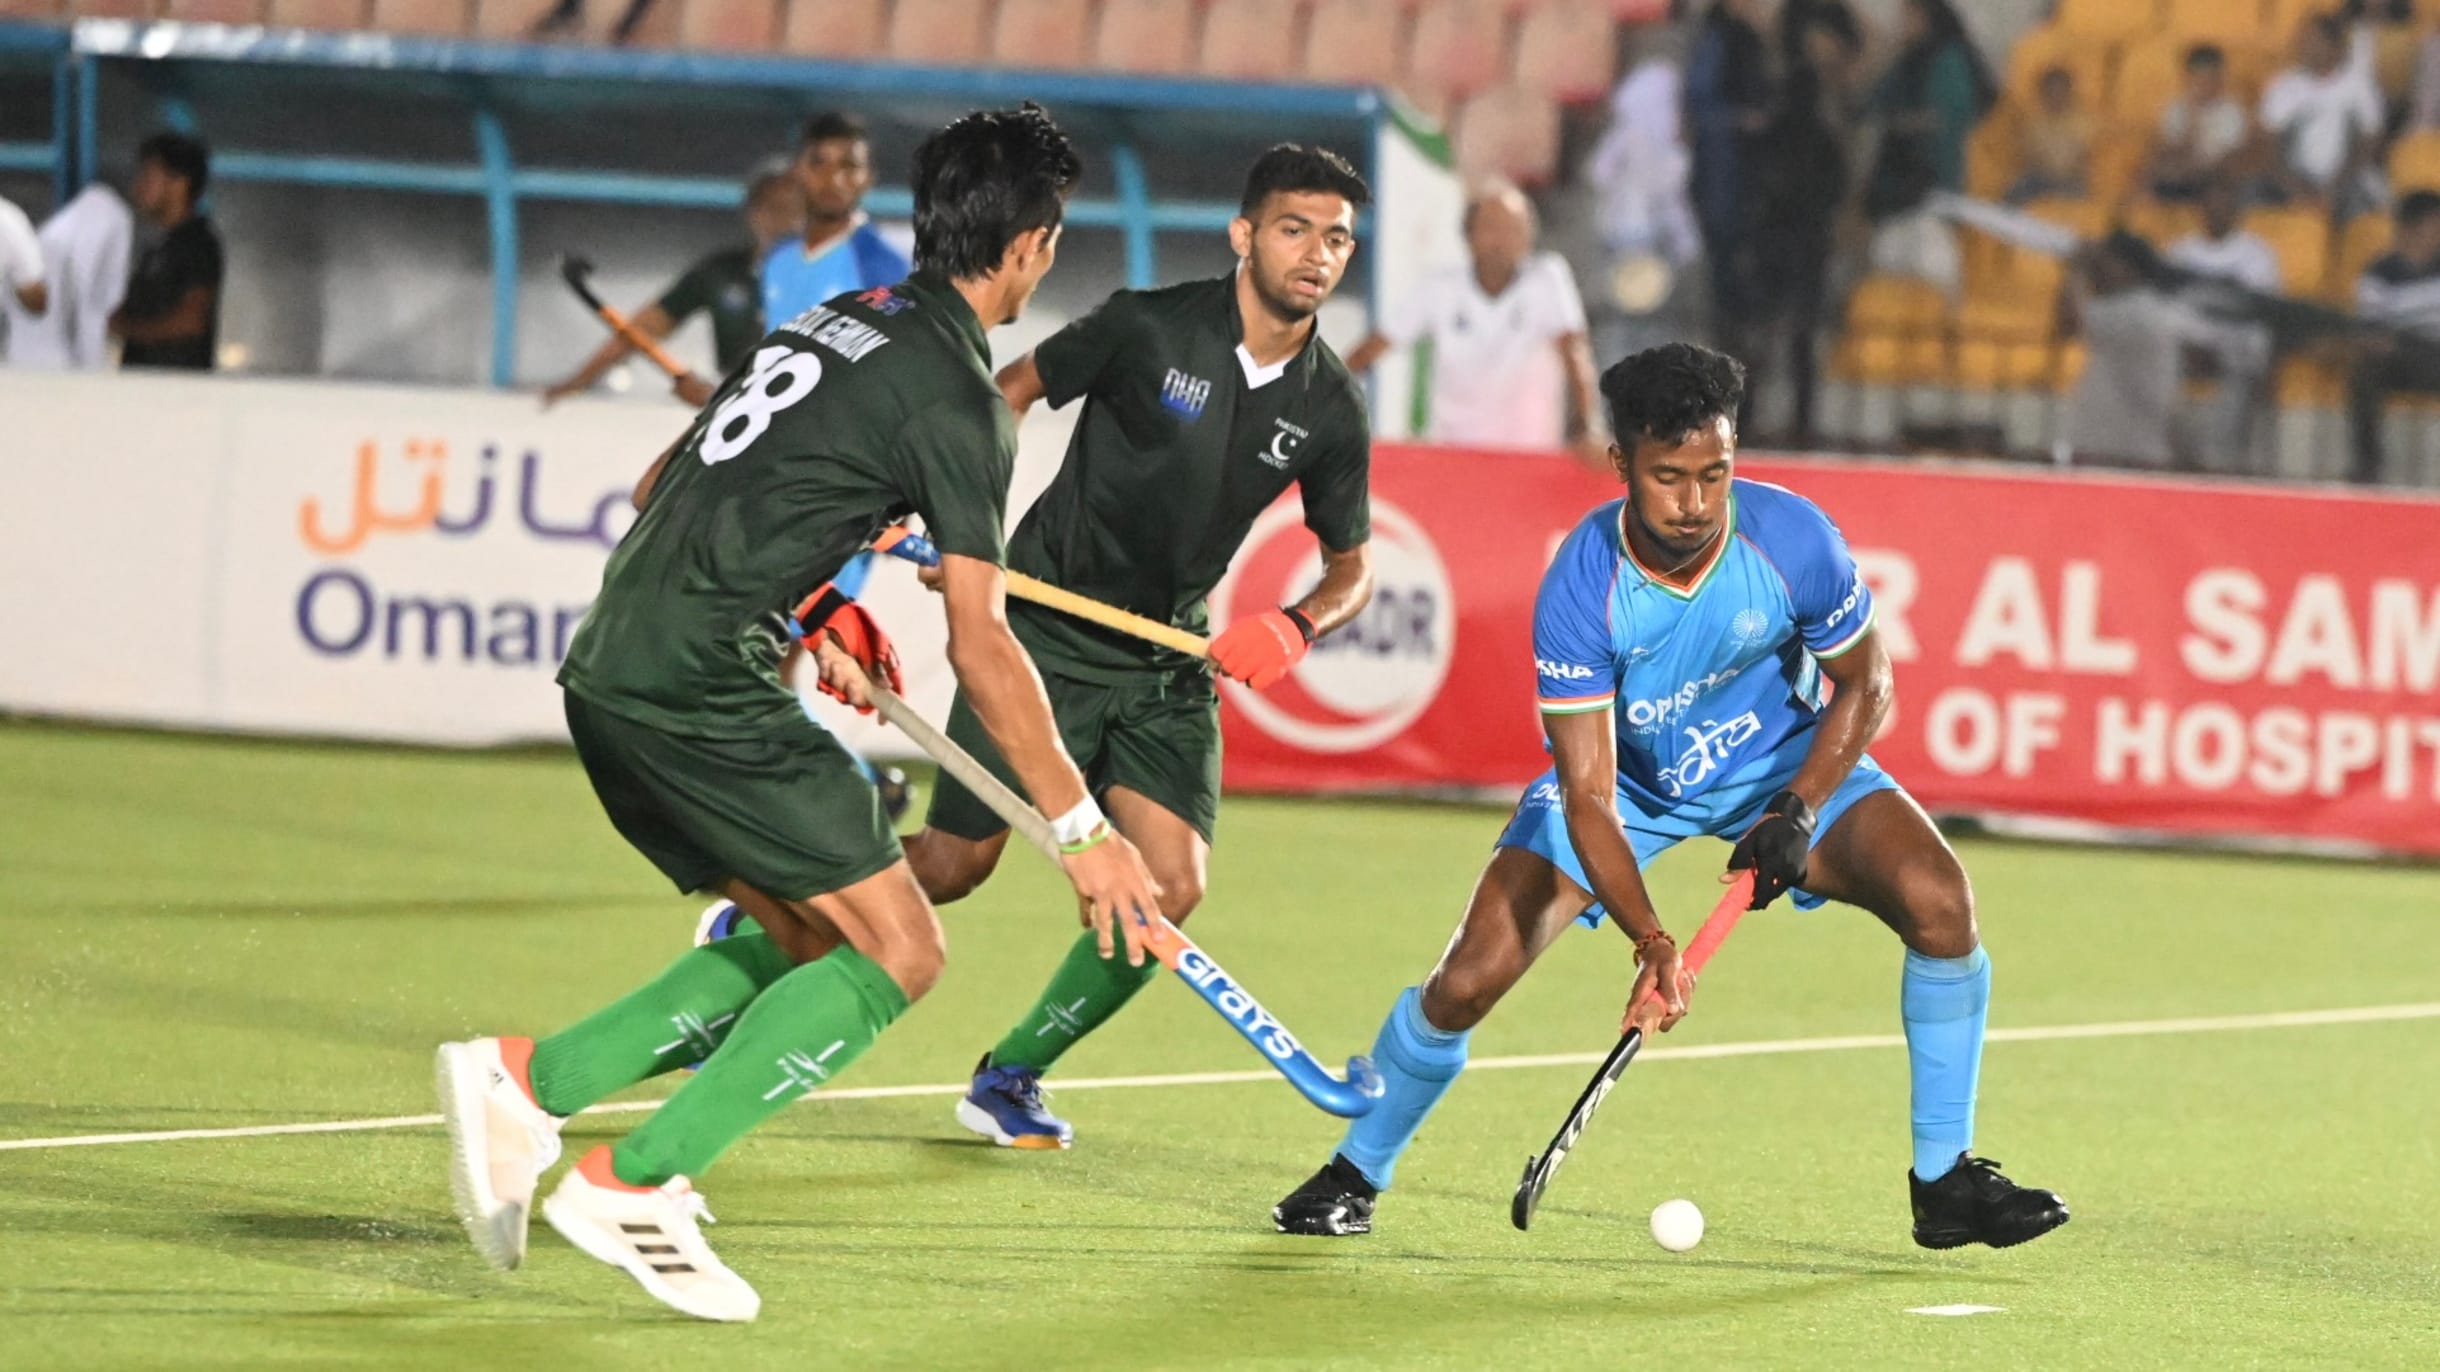 India vs Pakistan hockey match at Junior Asia Cup 2023 ends in 1-1 draw